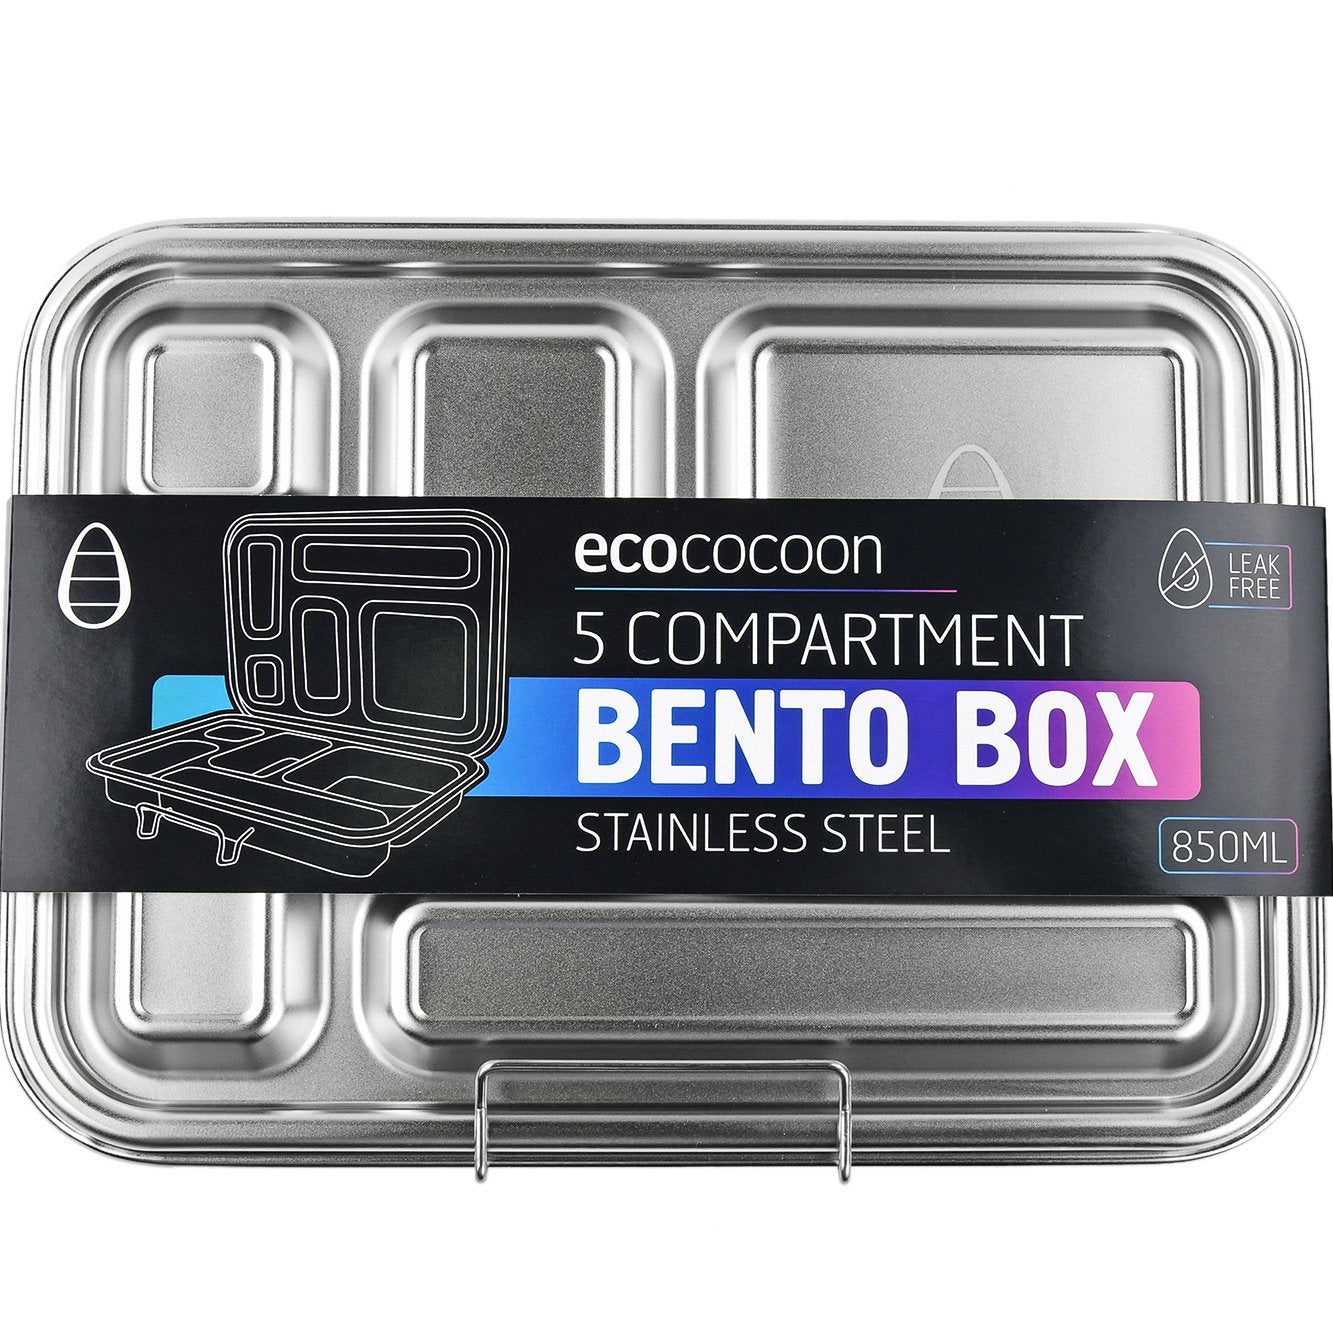 Ecococoon Stainless Steel Leakproof Bento Box - 5 compartment - Blueberry